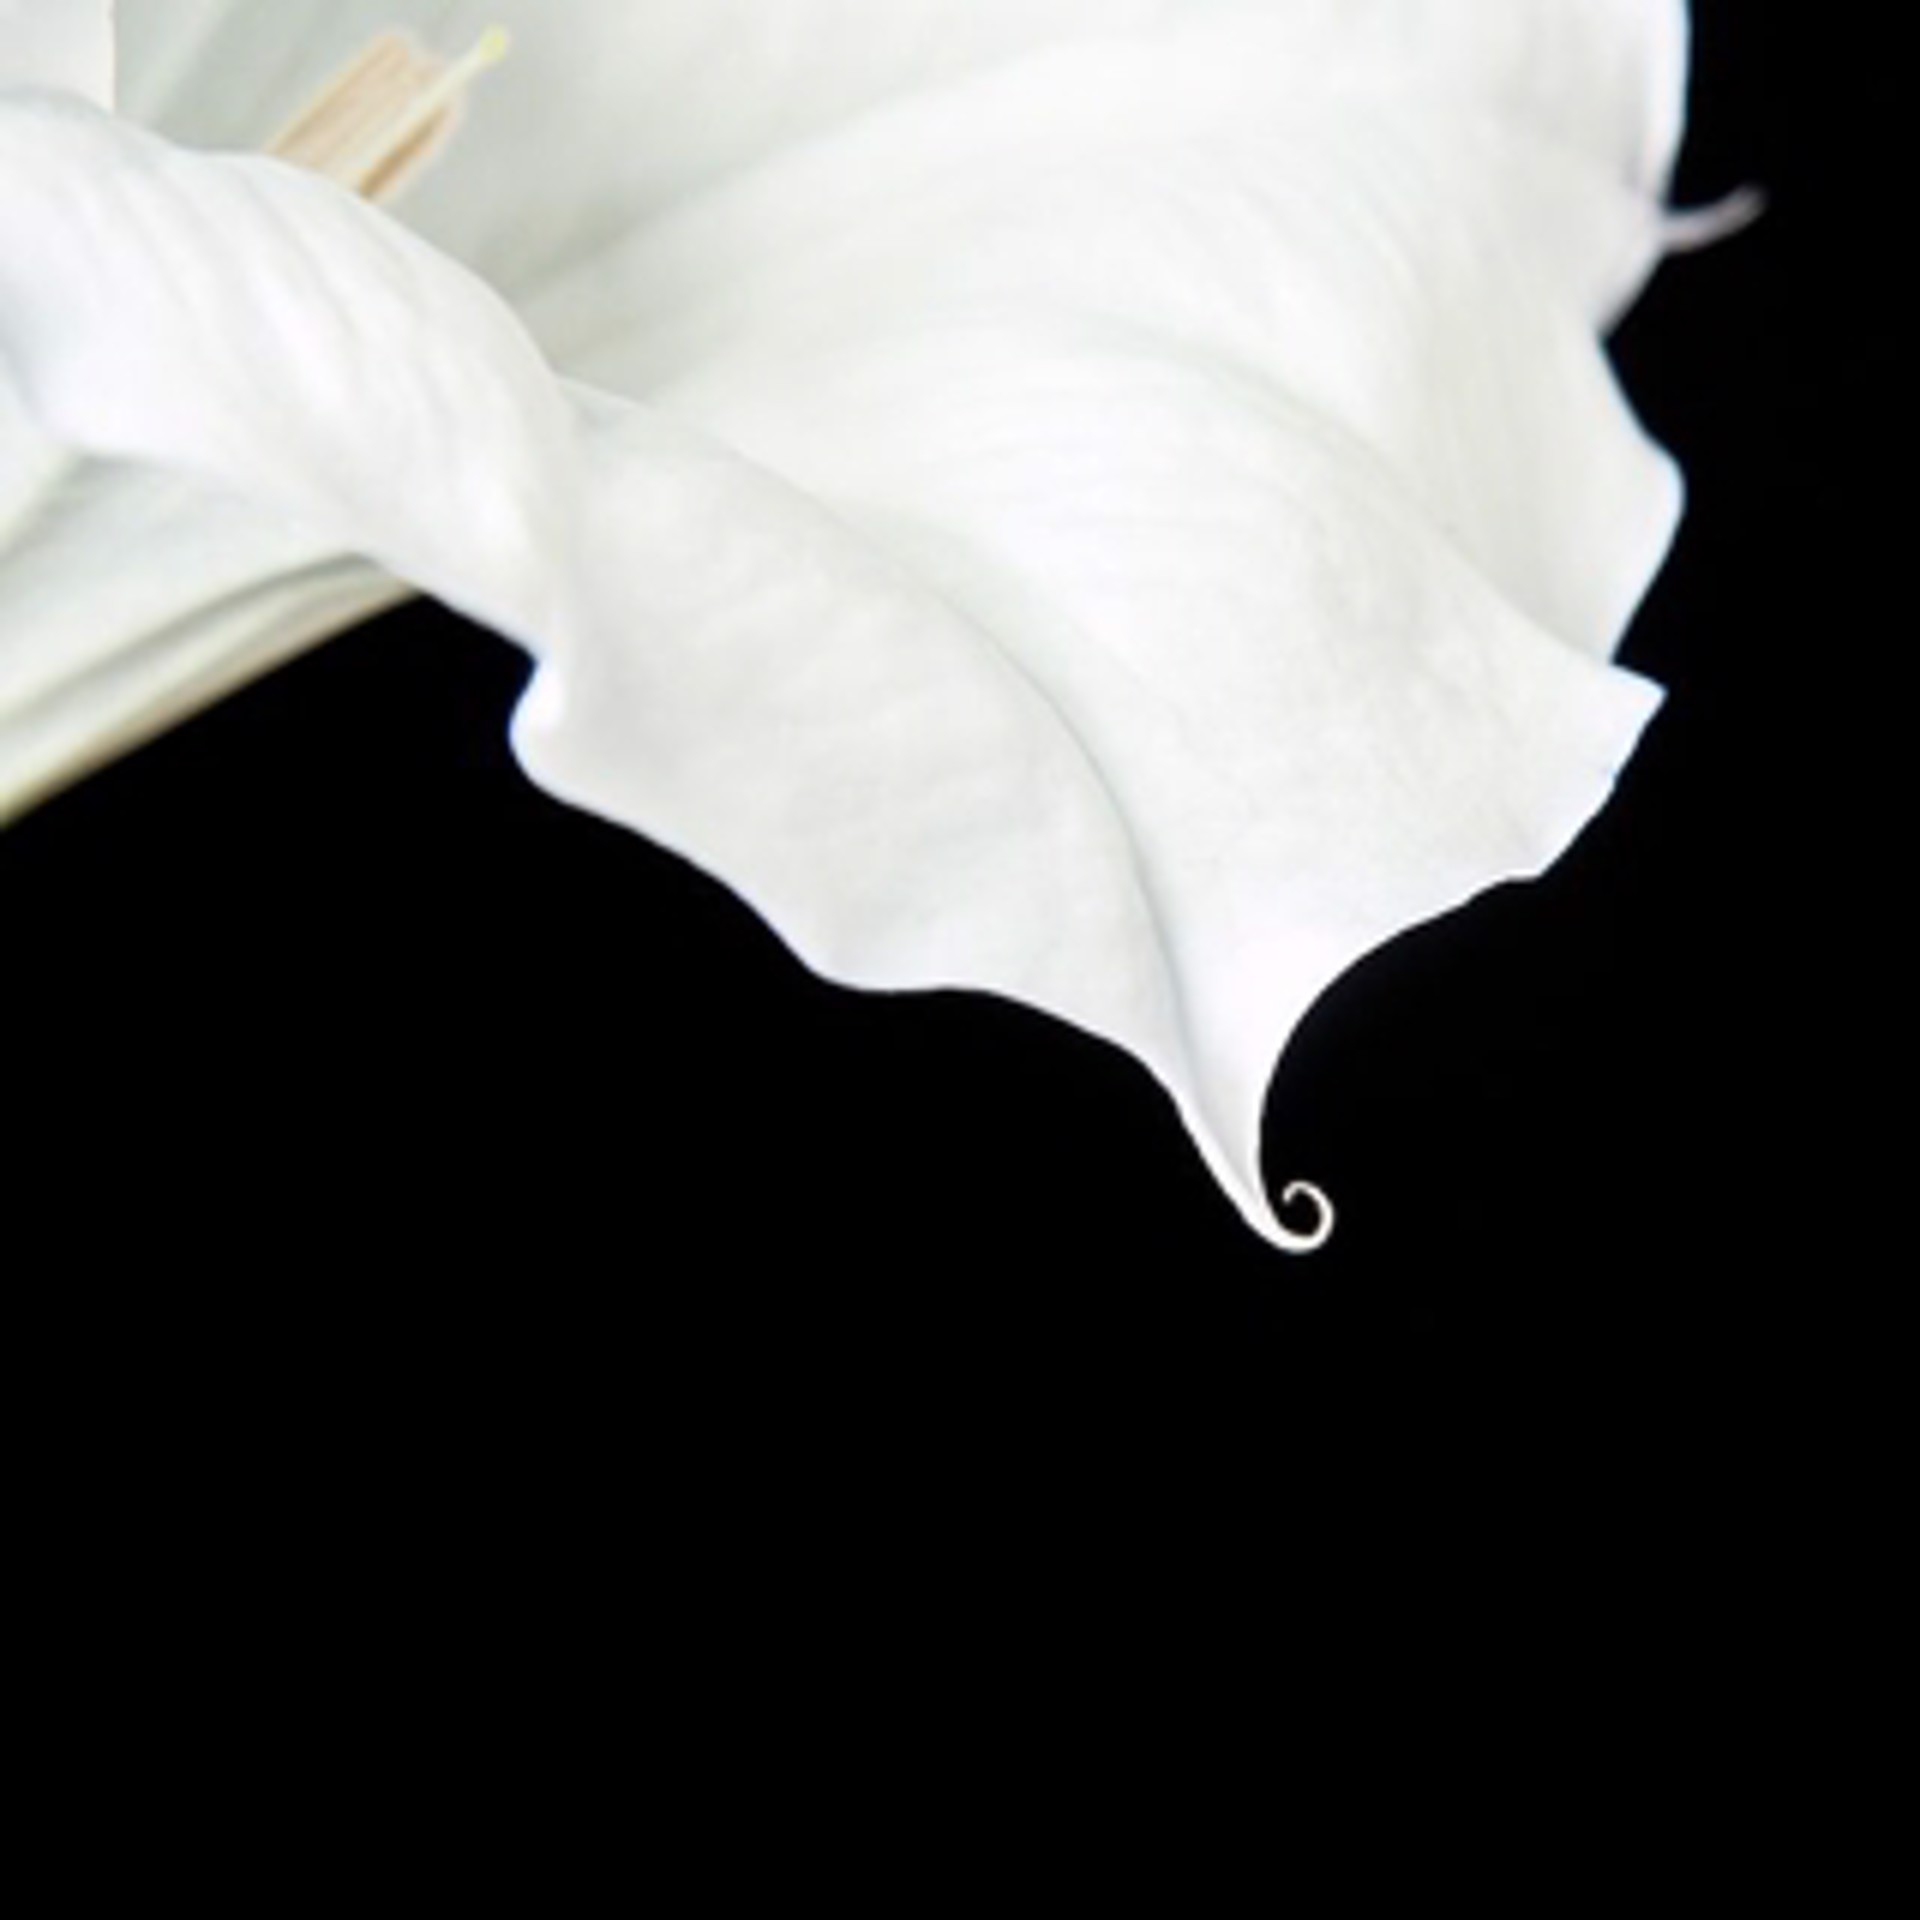 Datura Blossom, 1963 by Molly Wood